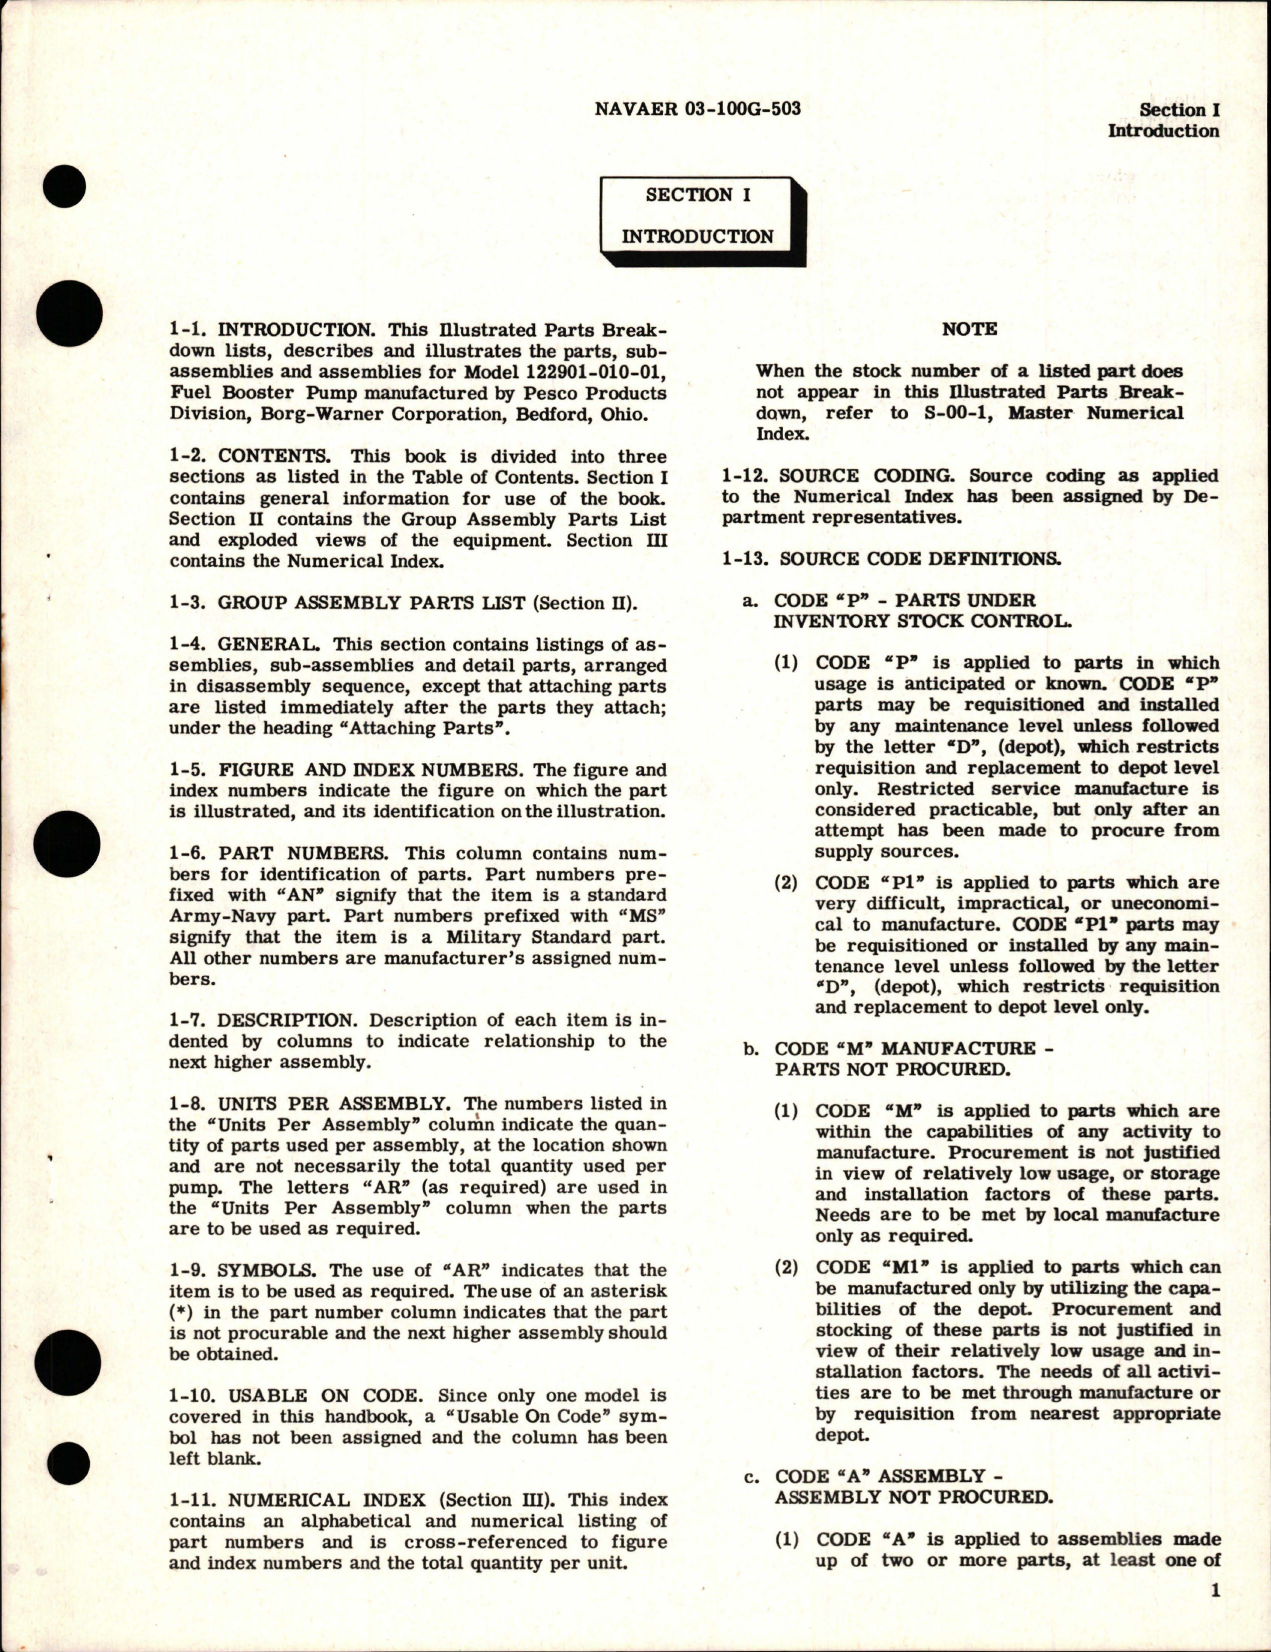 Sample page 5 from AirCorps Library document: Illustrated Parts Breakdown for Line Mounted Motor-Driven Fuel Booster Pump Assembly - Model 122901-010-01